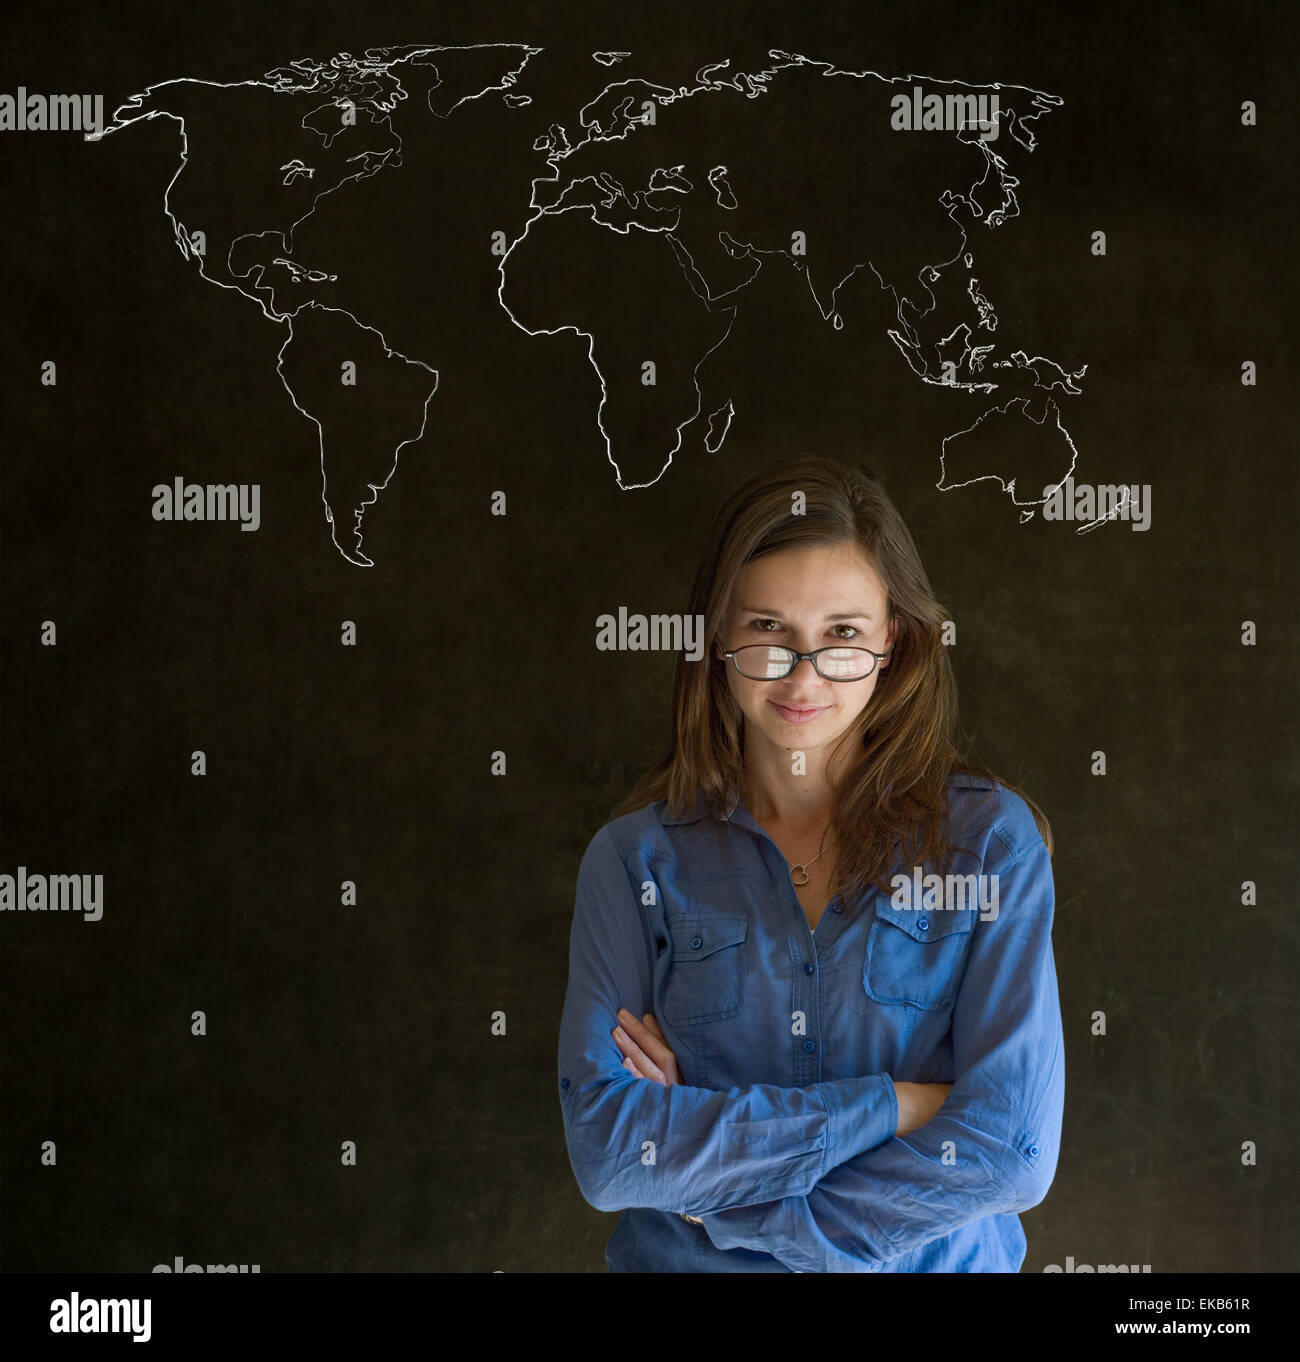 Businesswoman, teacher or student with world geography map on chalk background Stock Photo